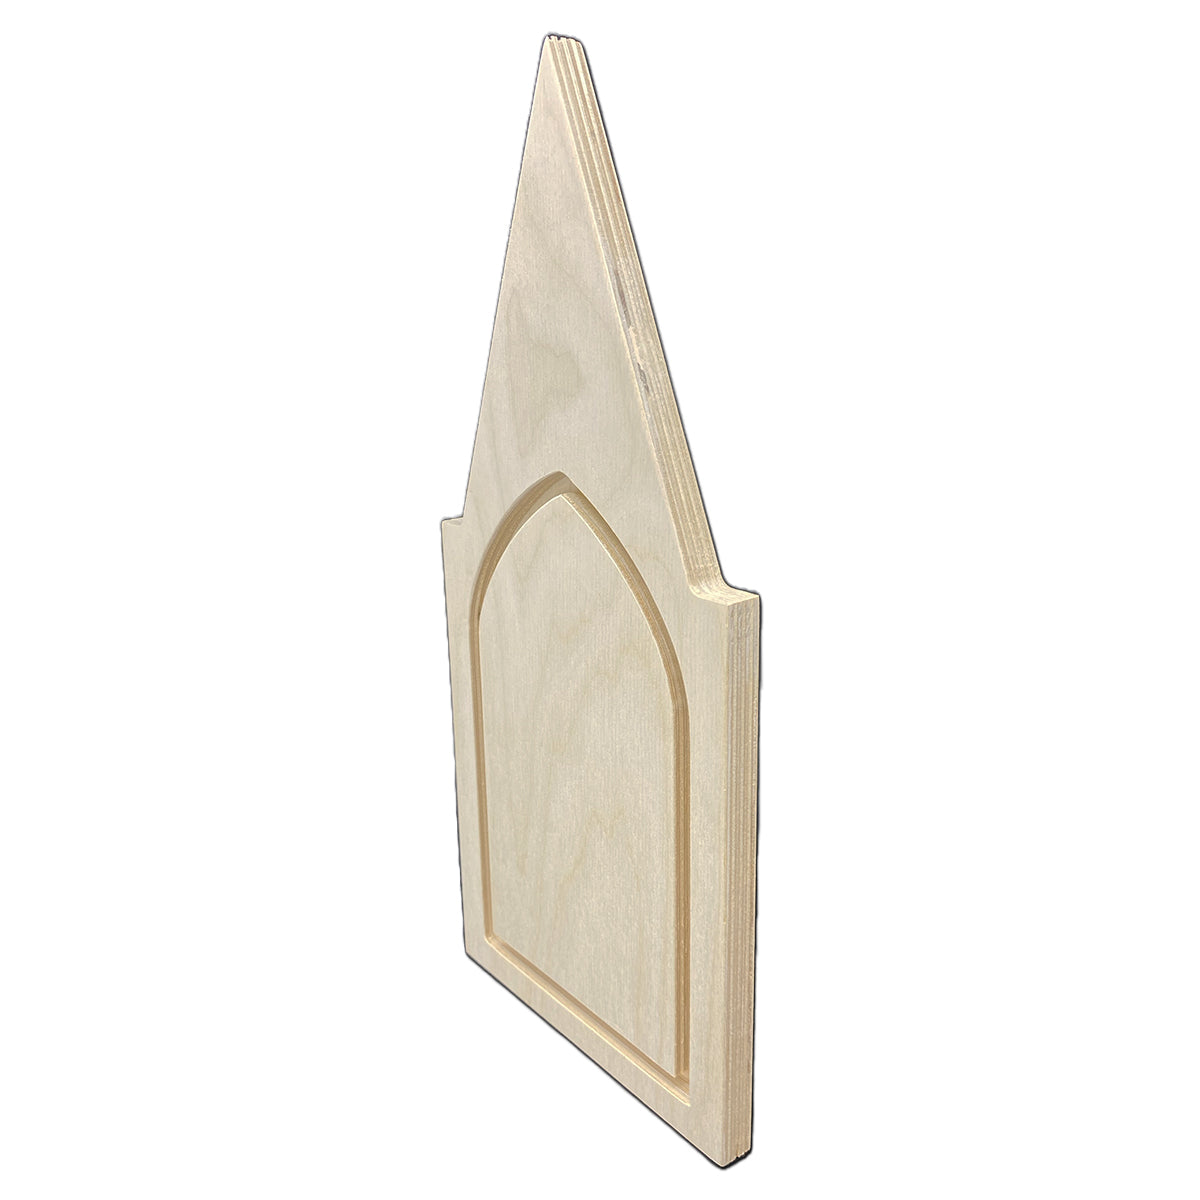 Prague Gothic Panel - Wooden Artist Canvas - Trekell Art Supplies 1/2" thick Baltic birch painting board for oil, acrylic, watercolor, gouache, enamel, encaustic paint, pastel, charcoal, ink, pencil and pyrography